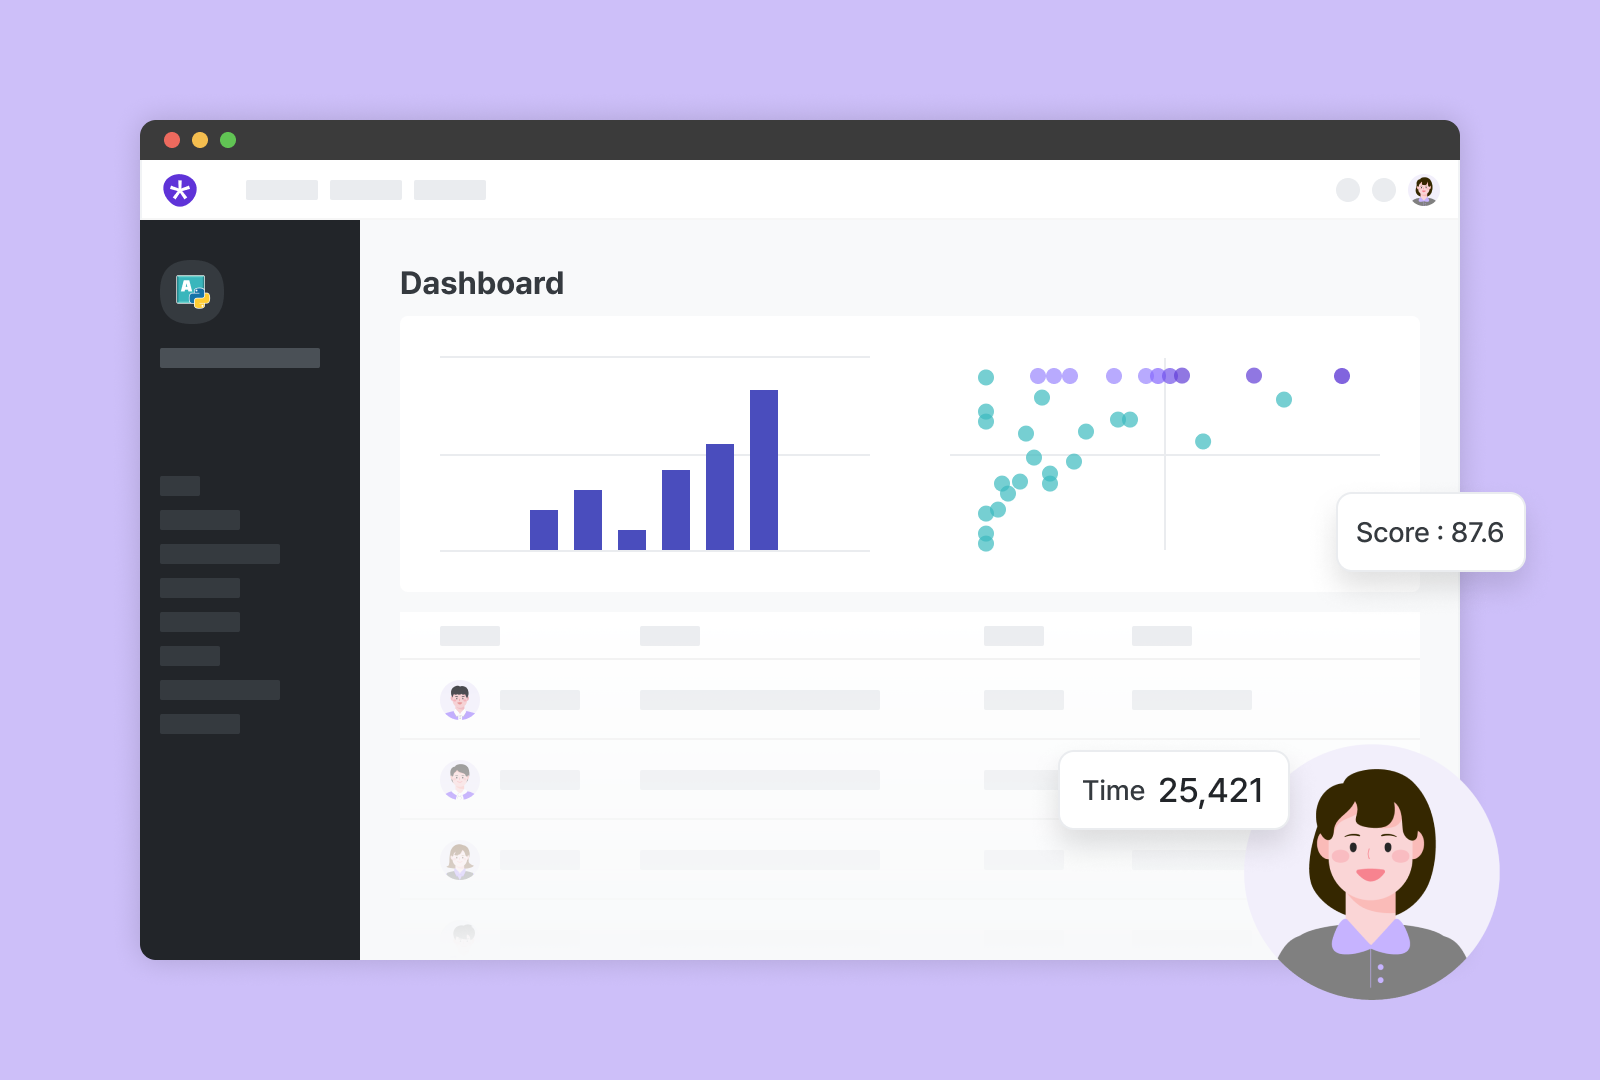 All learning data is gathered
in one dashboard